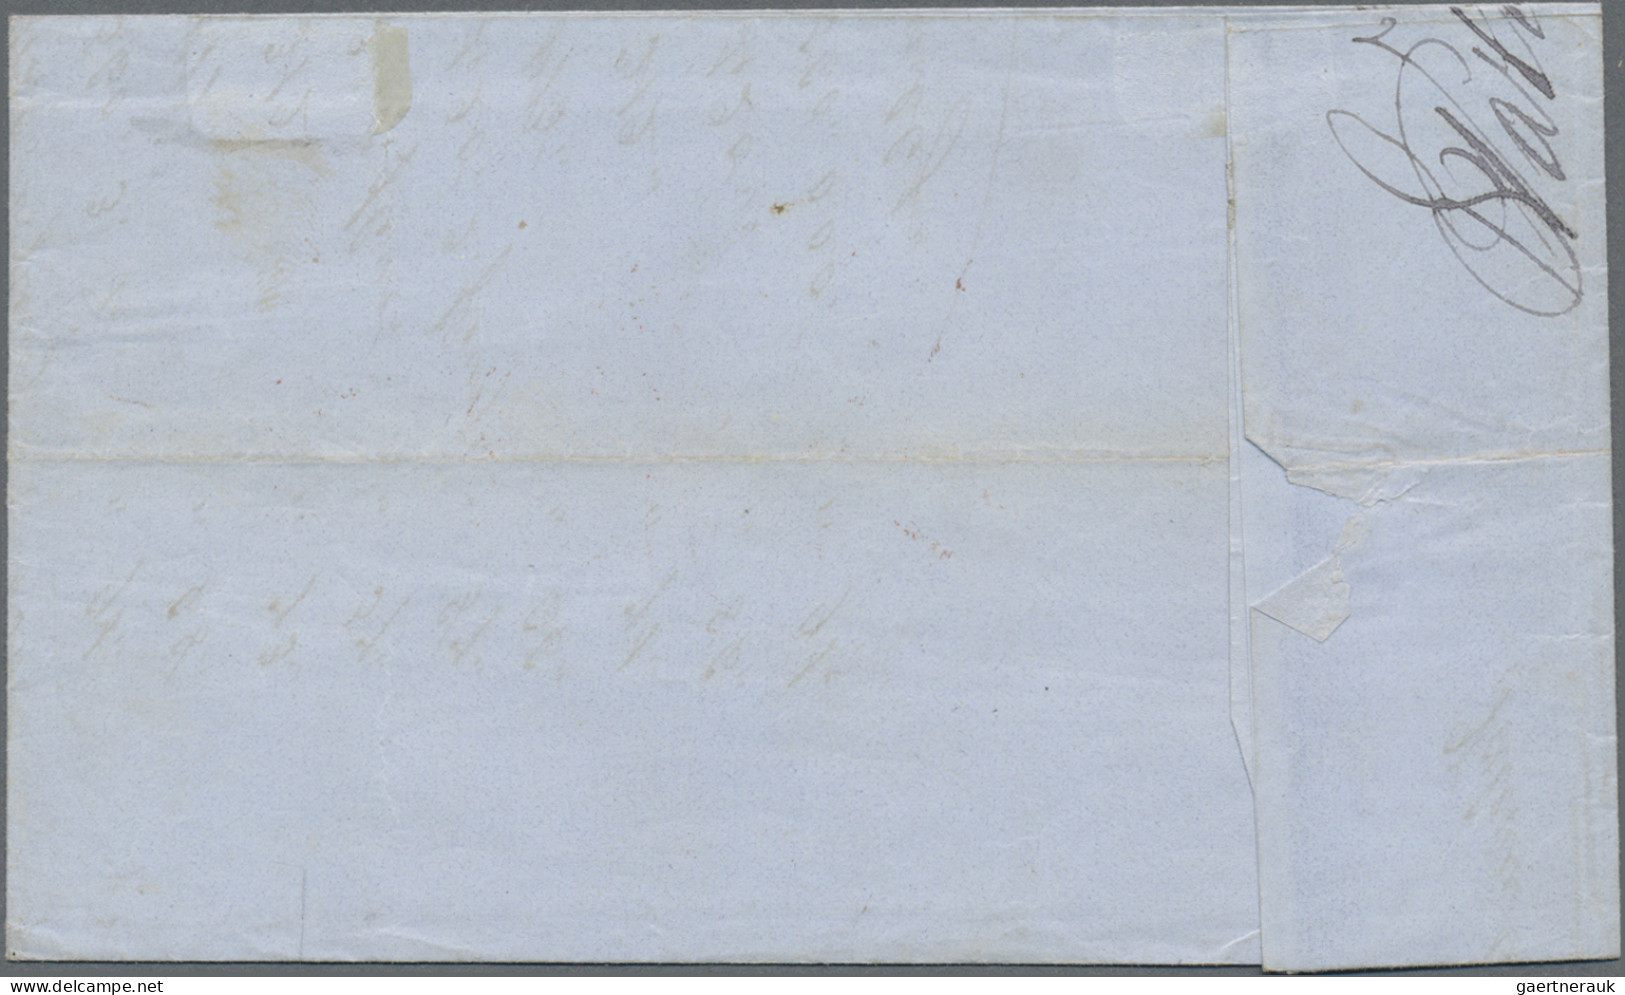 Spain: 1861/1865, four ship letters of same correspondence from Valencia to Mars